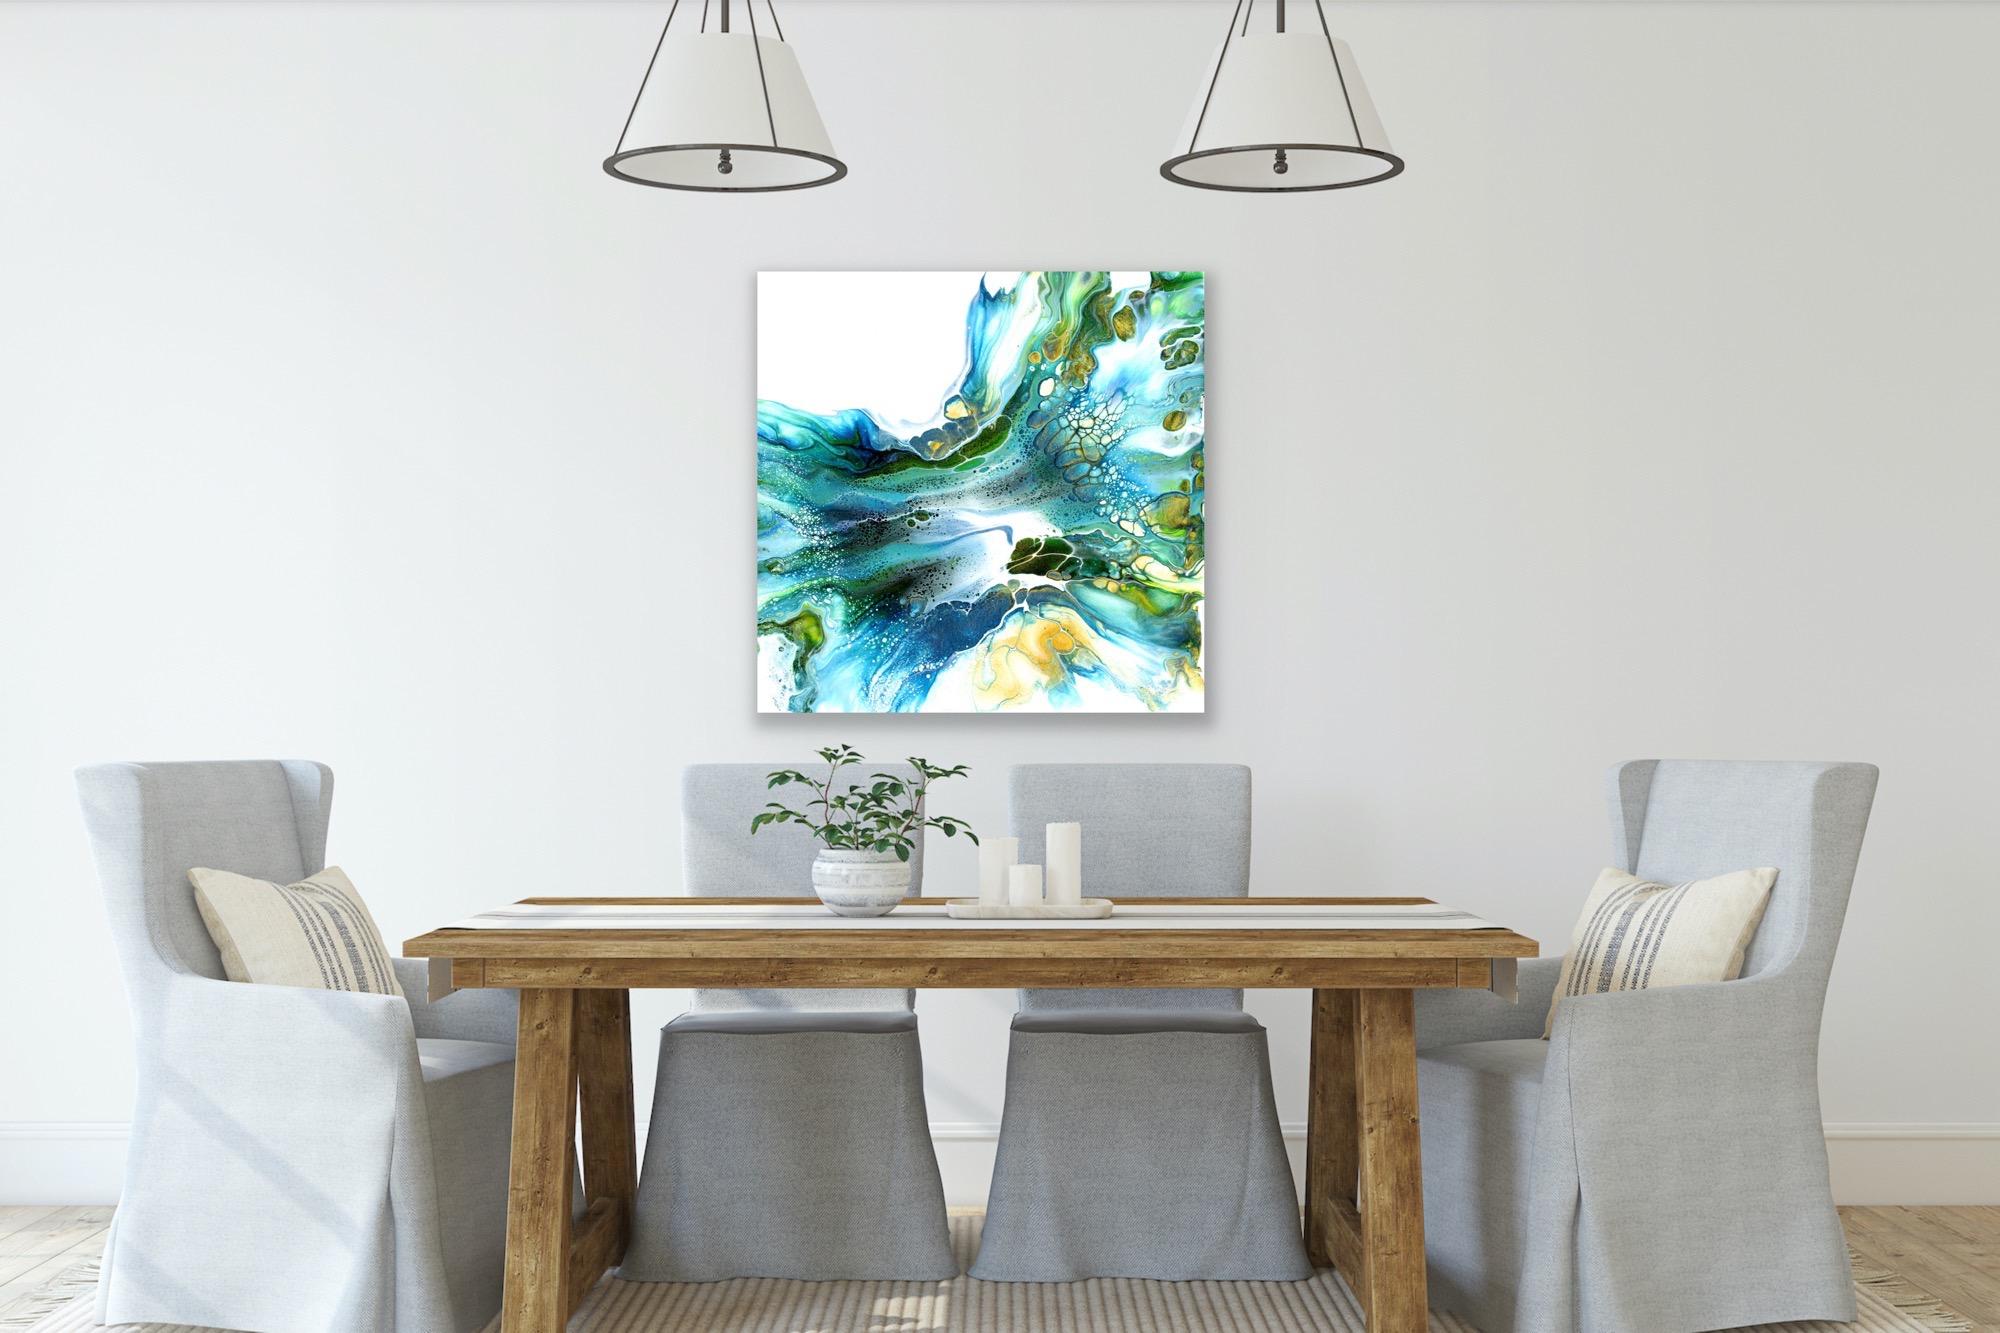 This contemporary modern abstract painting is printed on a lightweight metal composite and comes ready to hang. This vibrant composition can be hung both indoor and outdoor as it is weather resistant.

-Title: Centered
-Artist: Celeste